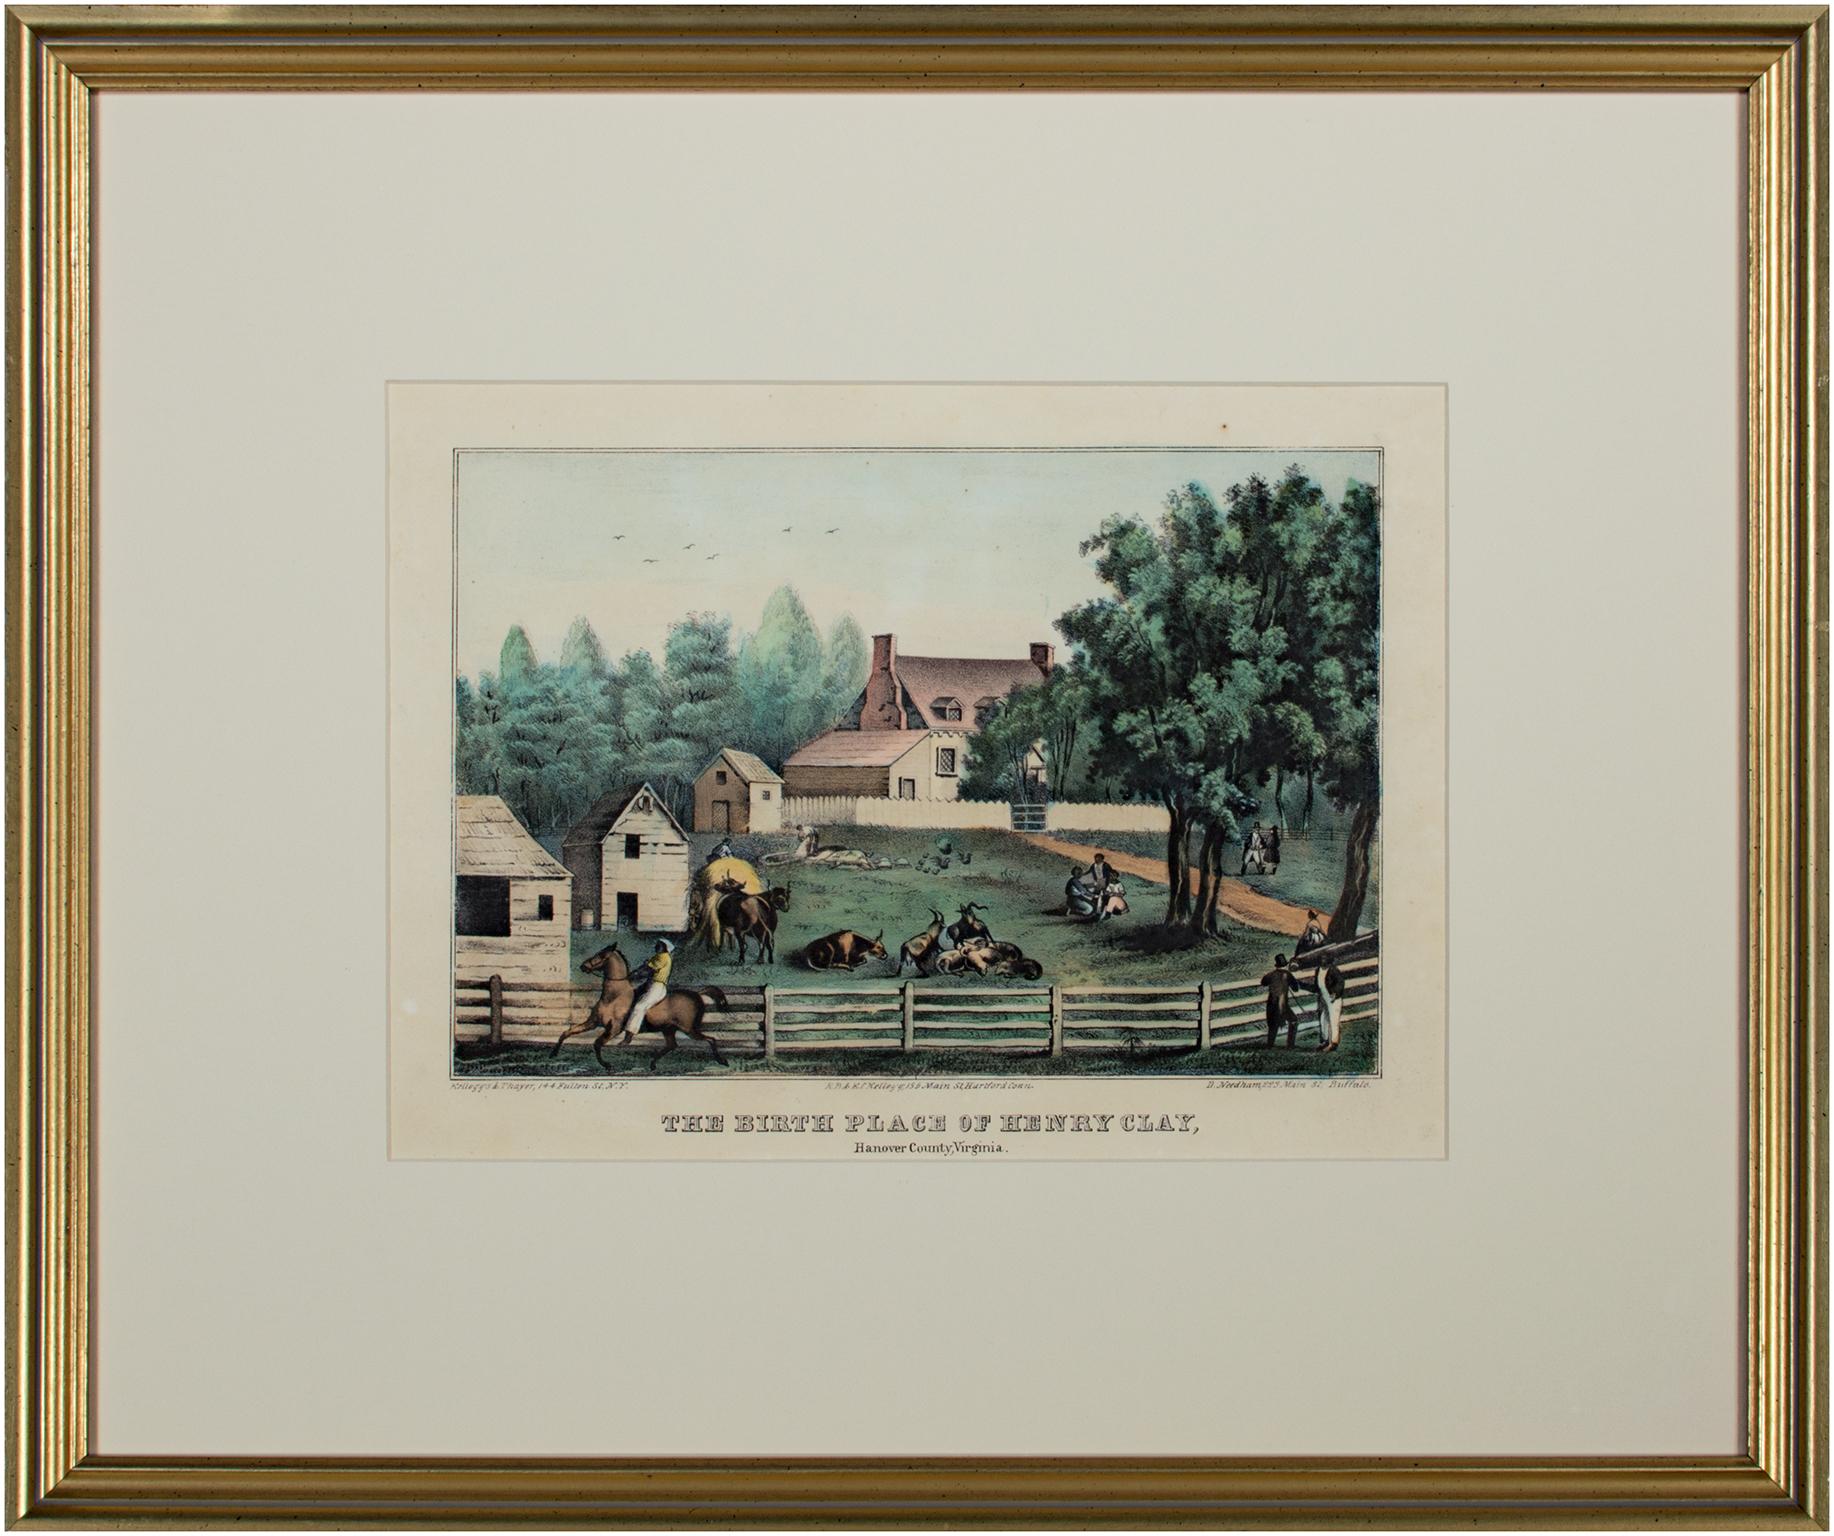 „Birthplace of Henry Clay, Hanover County, VA,“ Lithographie von Kelloggs & Thayer im Angebot 4